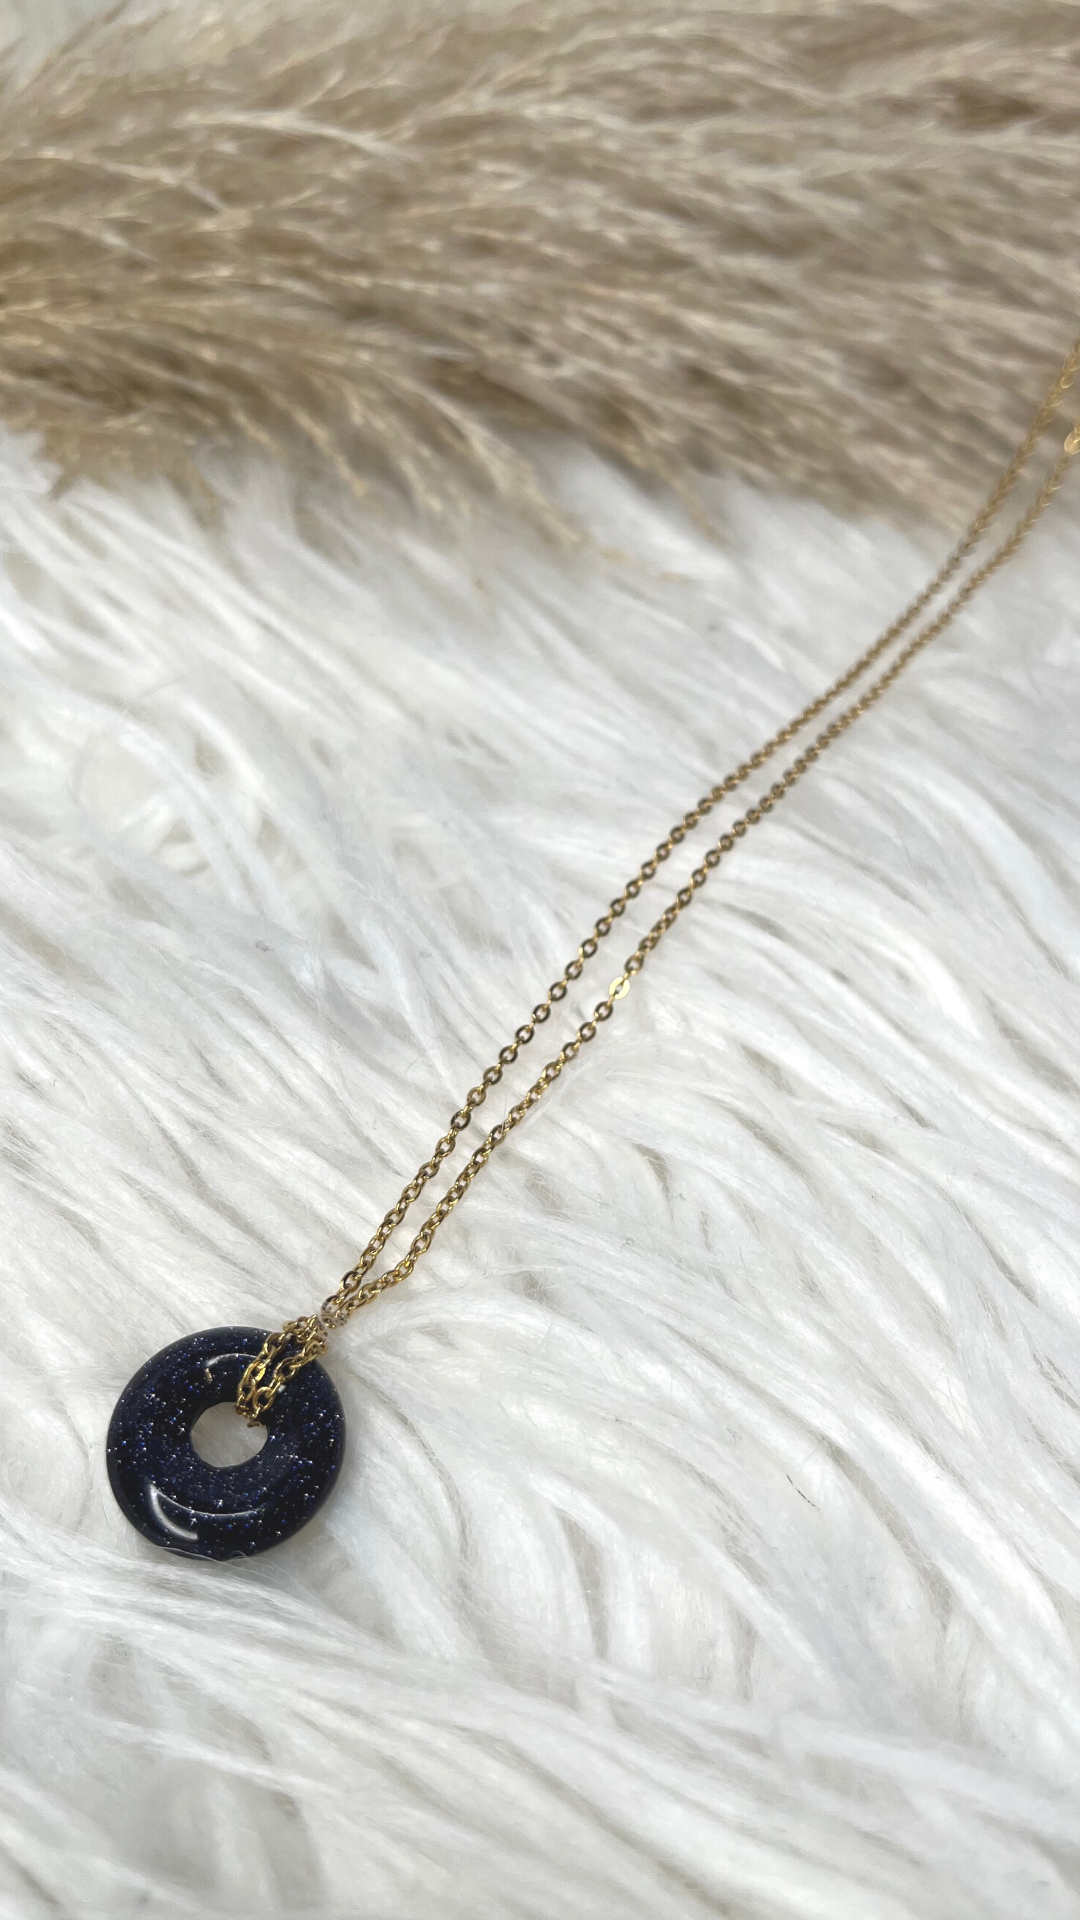 The Torus Necklace - Natural Blue Sandstone crystal with 18k gold-plated, Stainless-steel chain